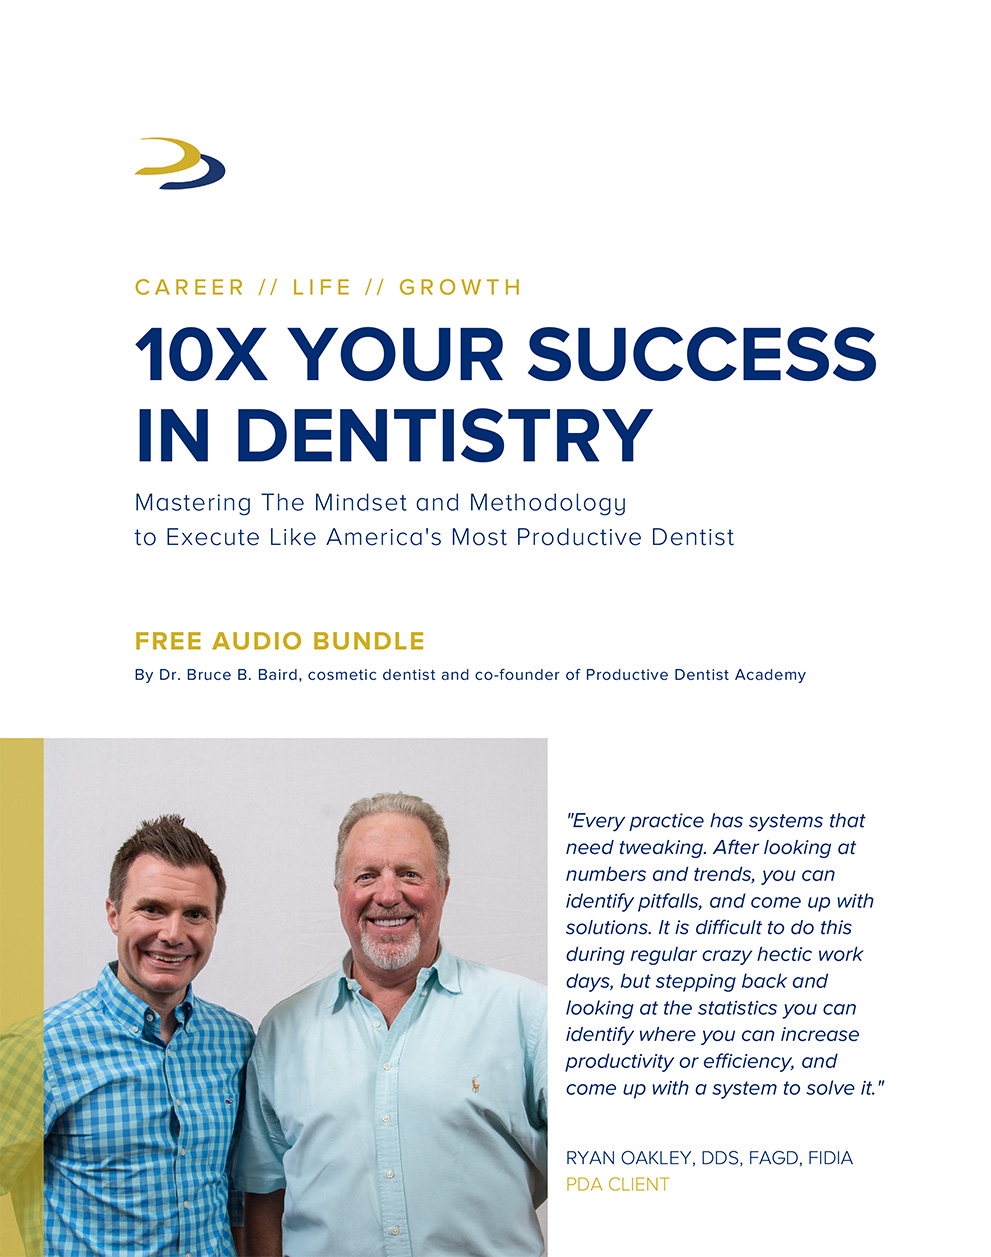 10X YOUR SUCCESS IN DENTISTRY Whitepaper